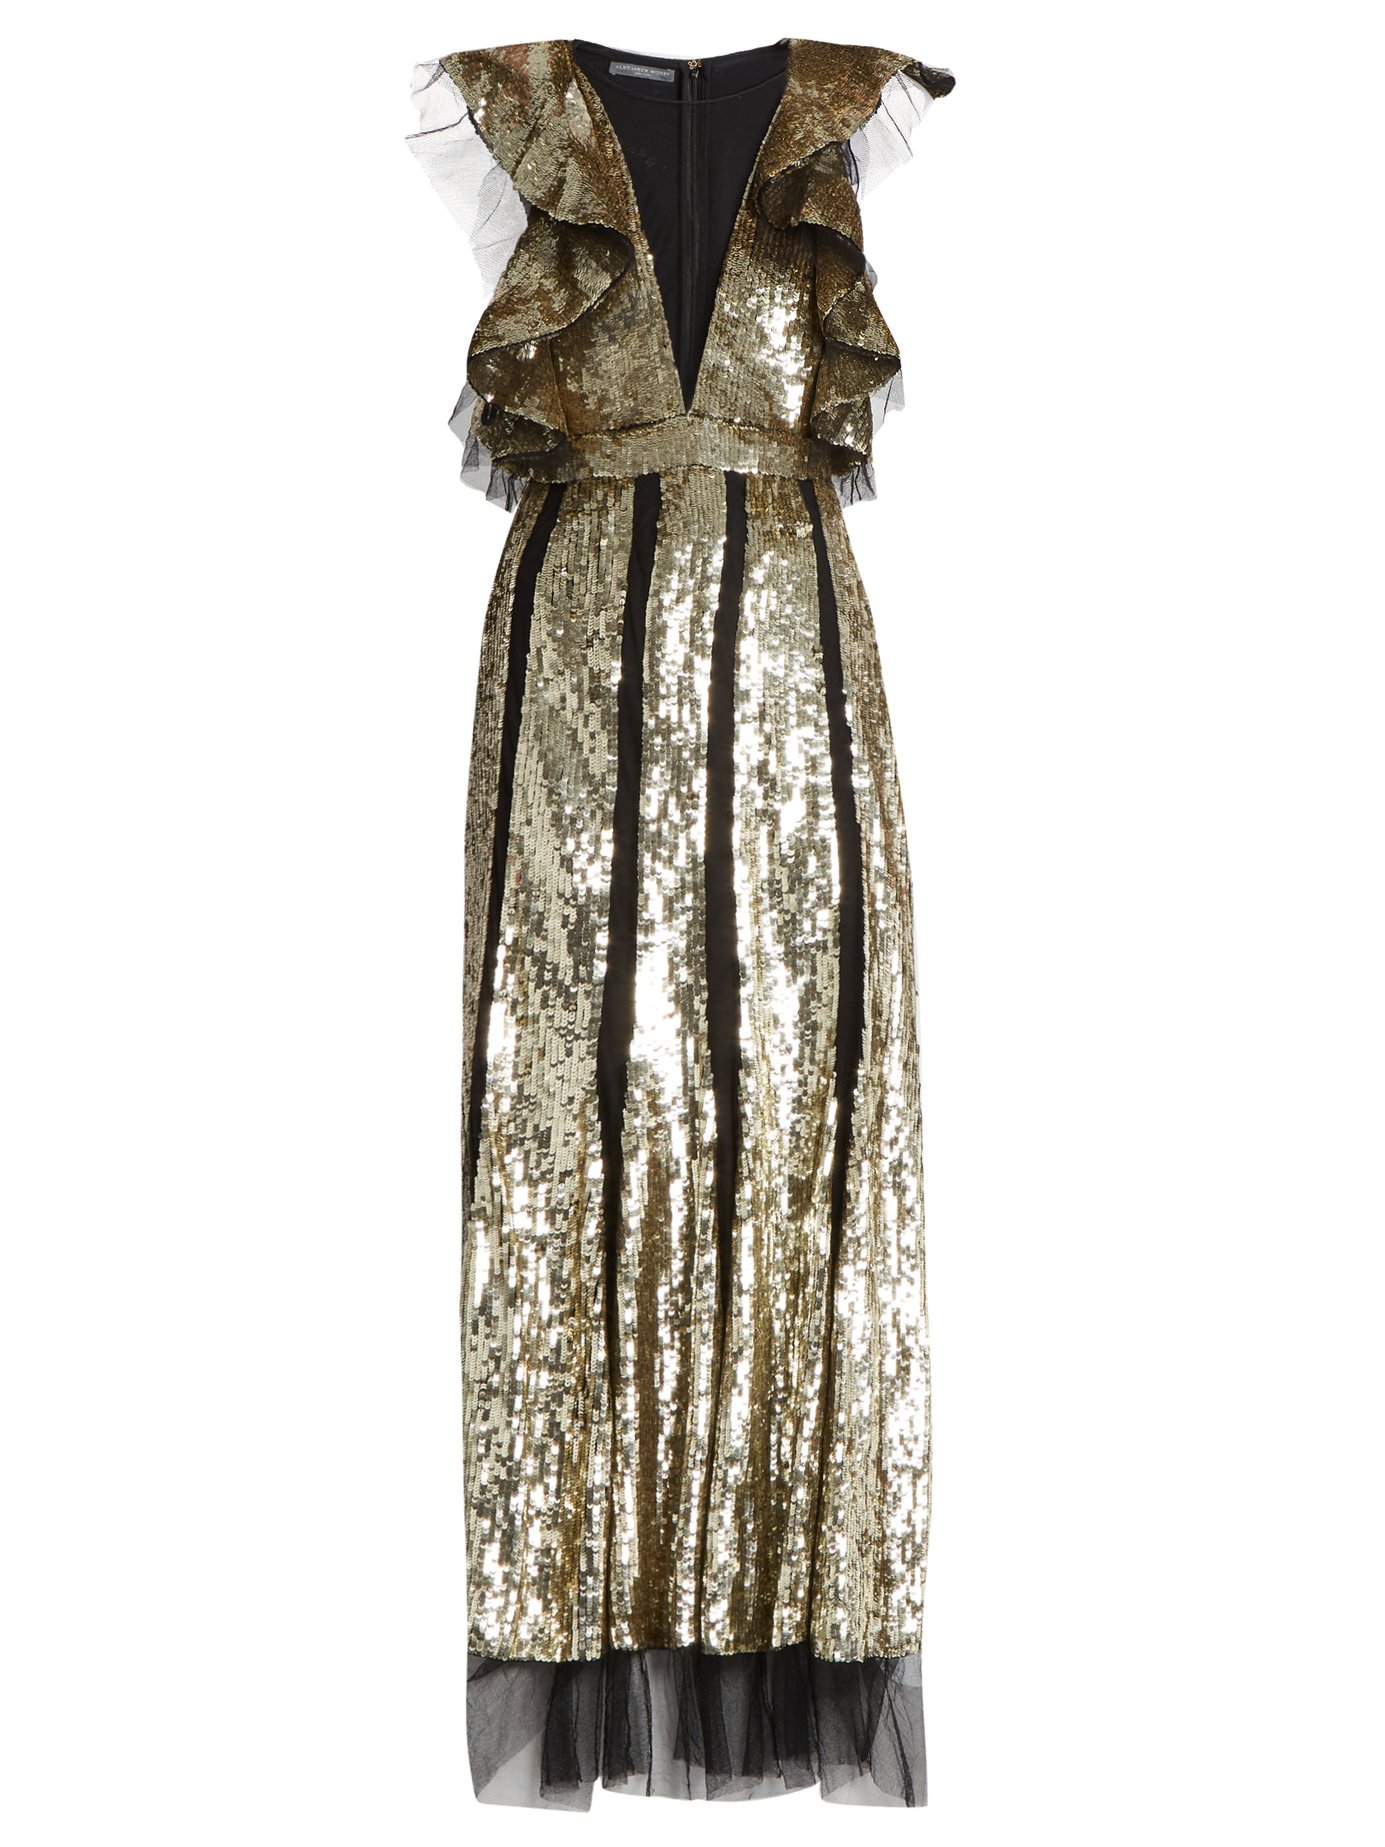 Alexander McQueen dials up the drama with this georgette gown.